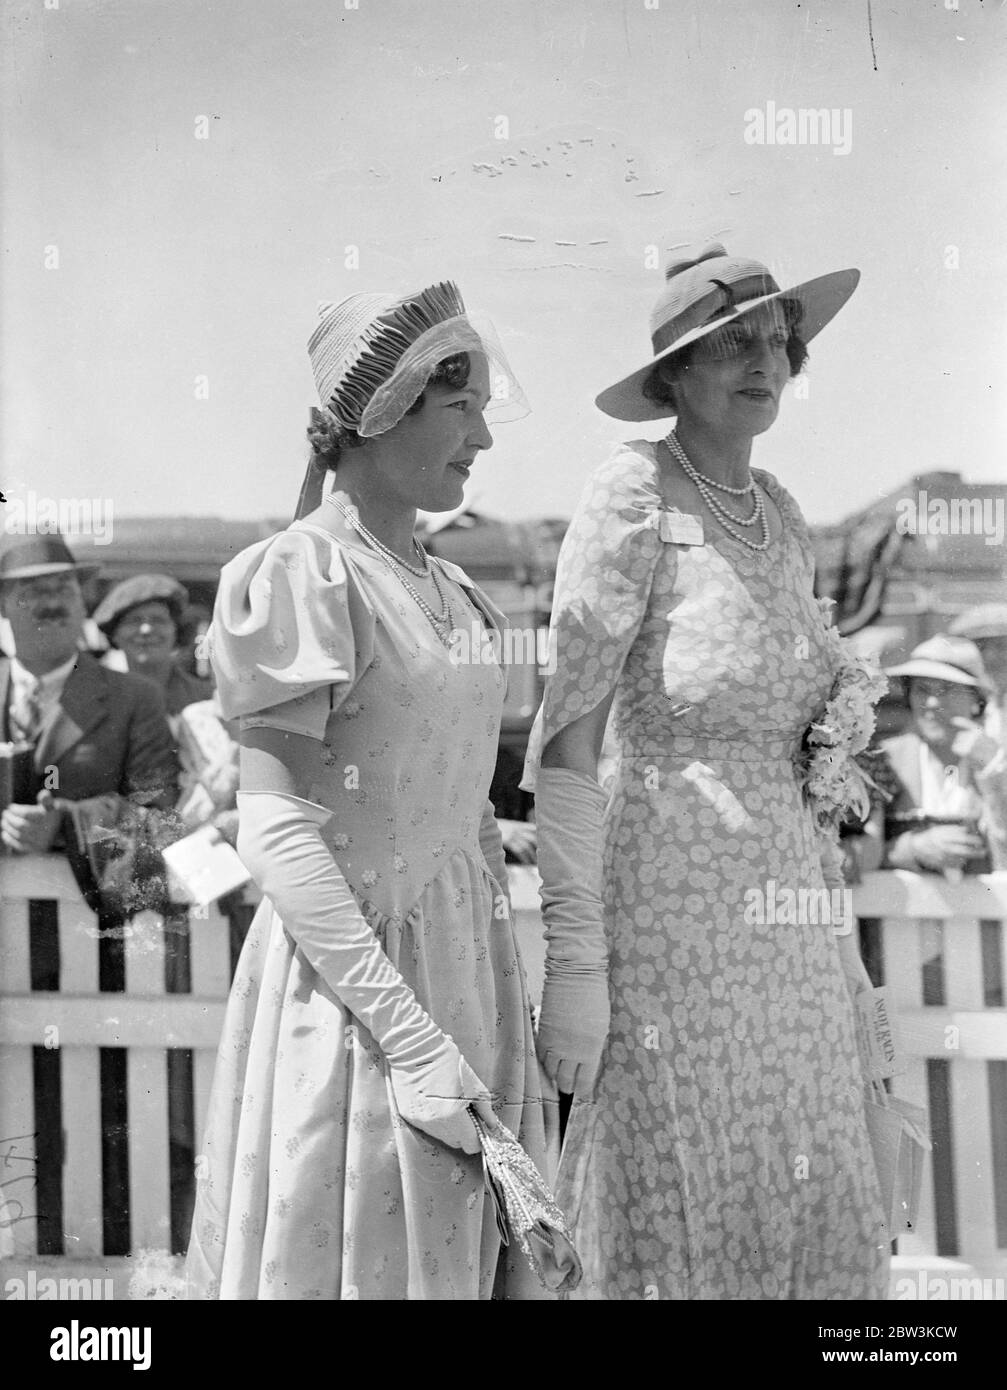 Musical hat fashion at Ascot . Ascot , on Royal Hunt Cup day , favoured with even better weather conditions then the opening , saw an even greater variety of lovely fashions . Photo shows , an unusual hat fashion worn with elbow length gloves by a woman racegoer at Ascot . 17 June 1936 Stock Photo